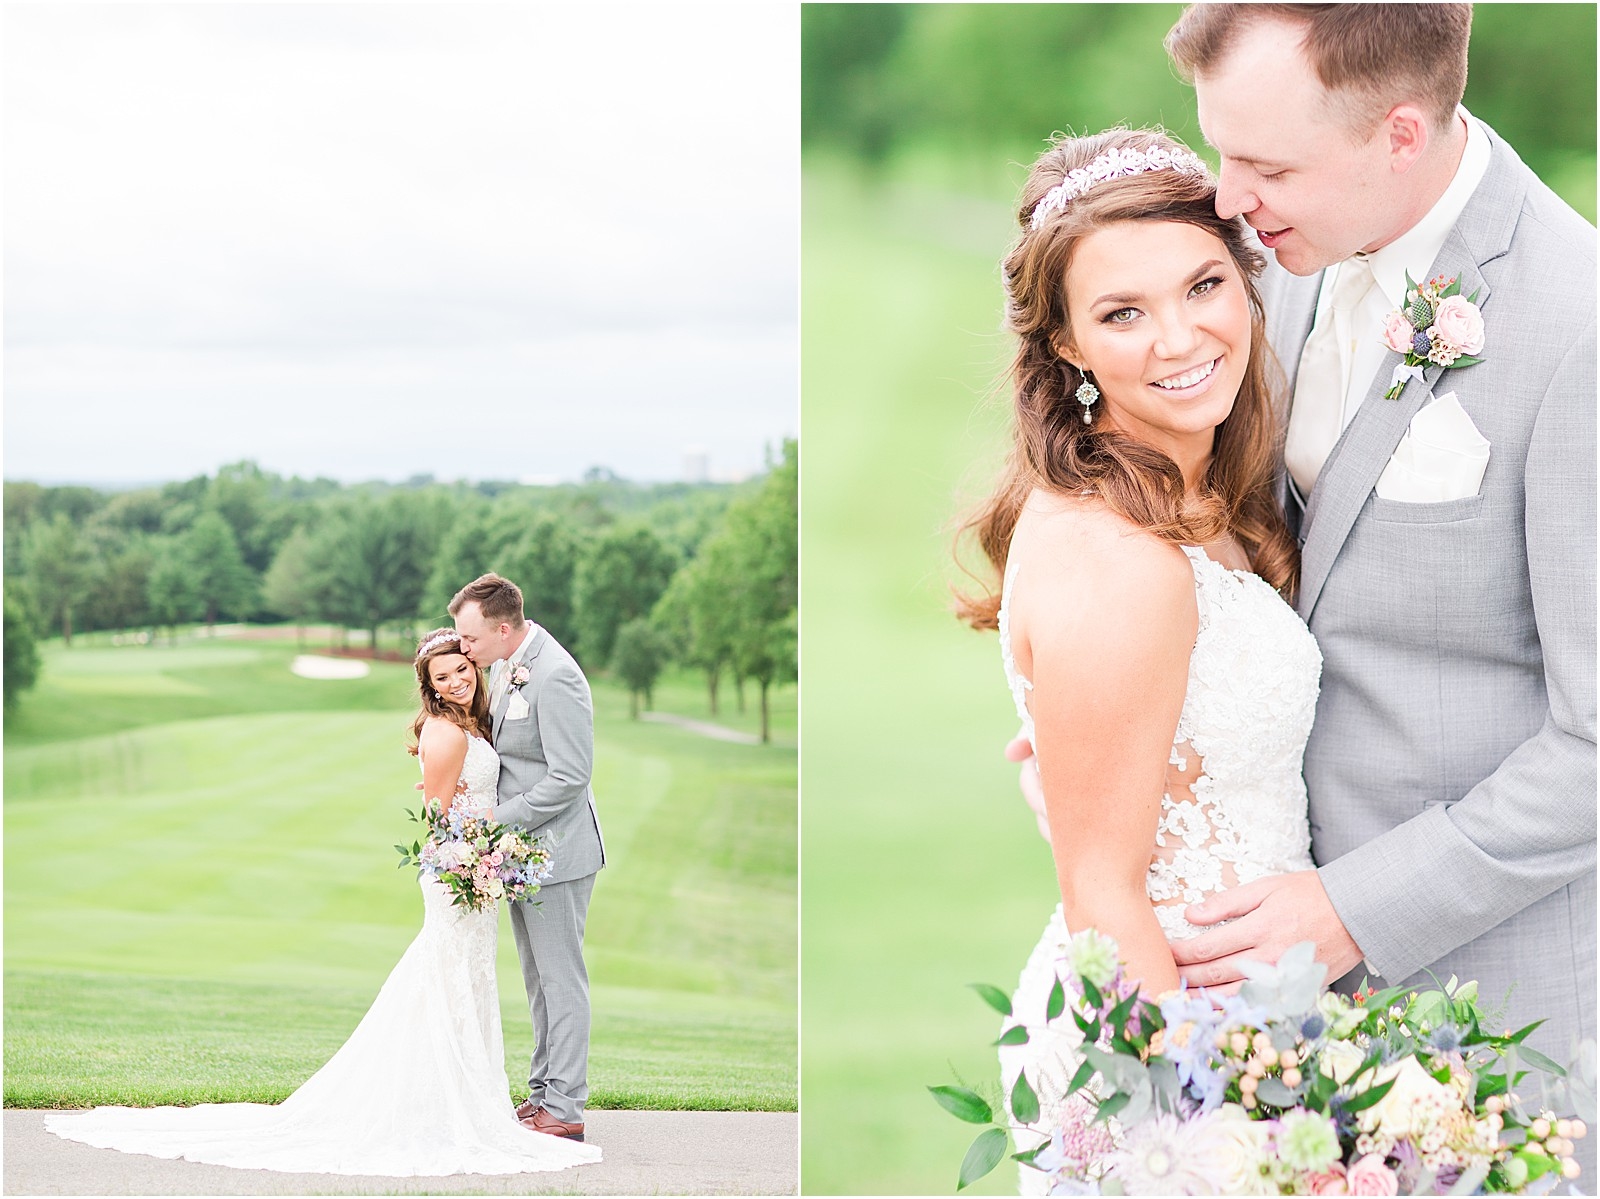 An Evansville County Club Wedding | Abby and Stratton 055.jpg